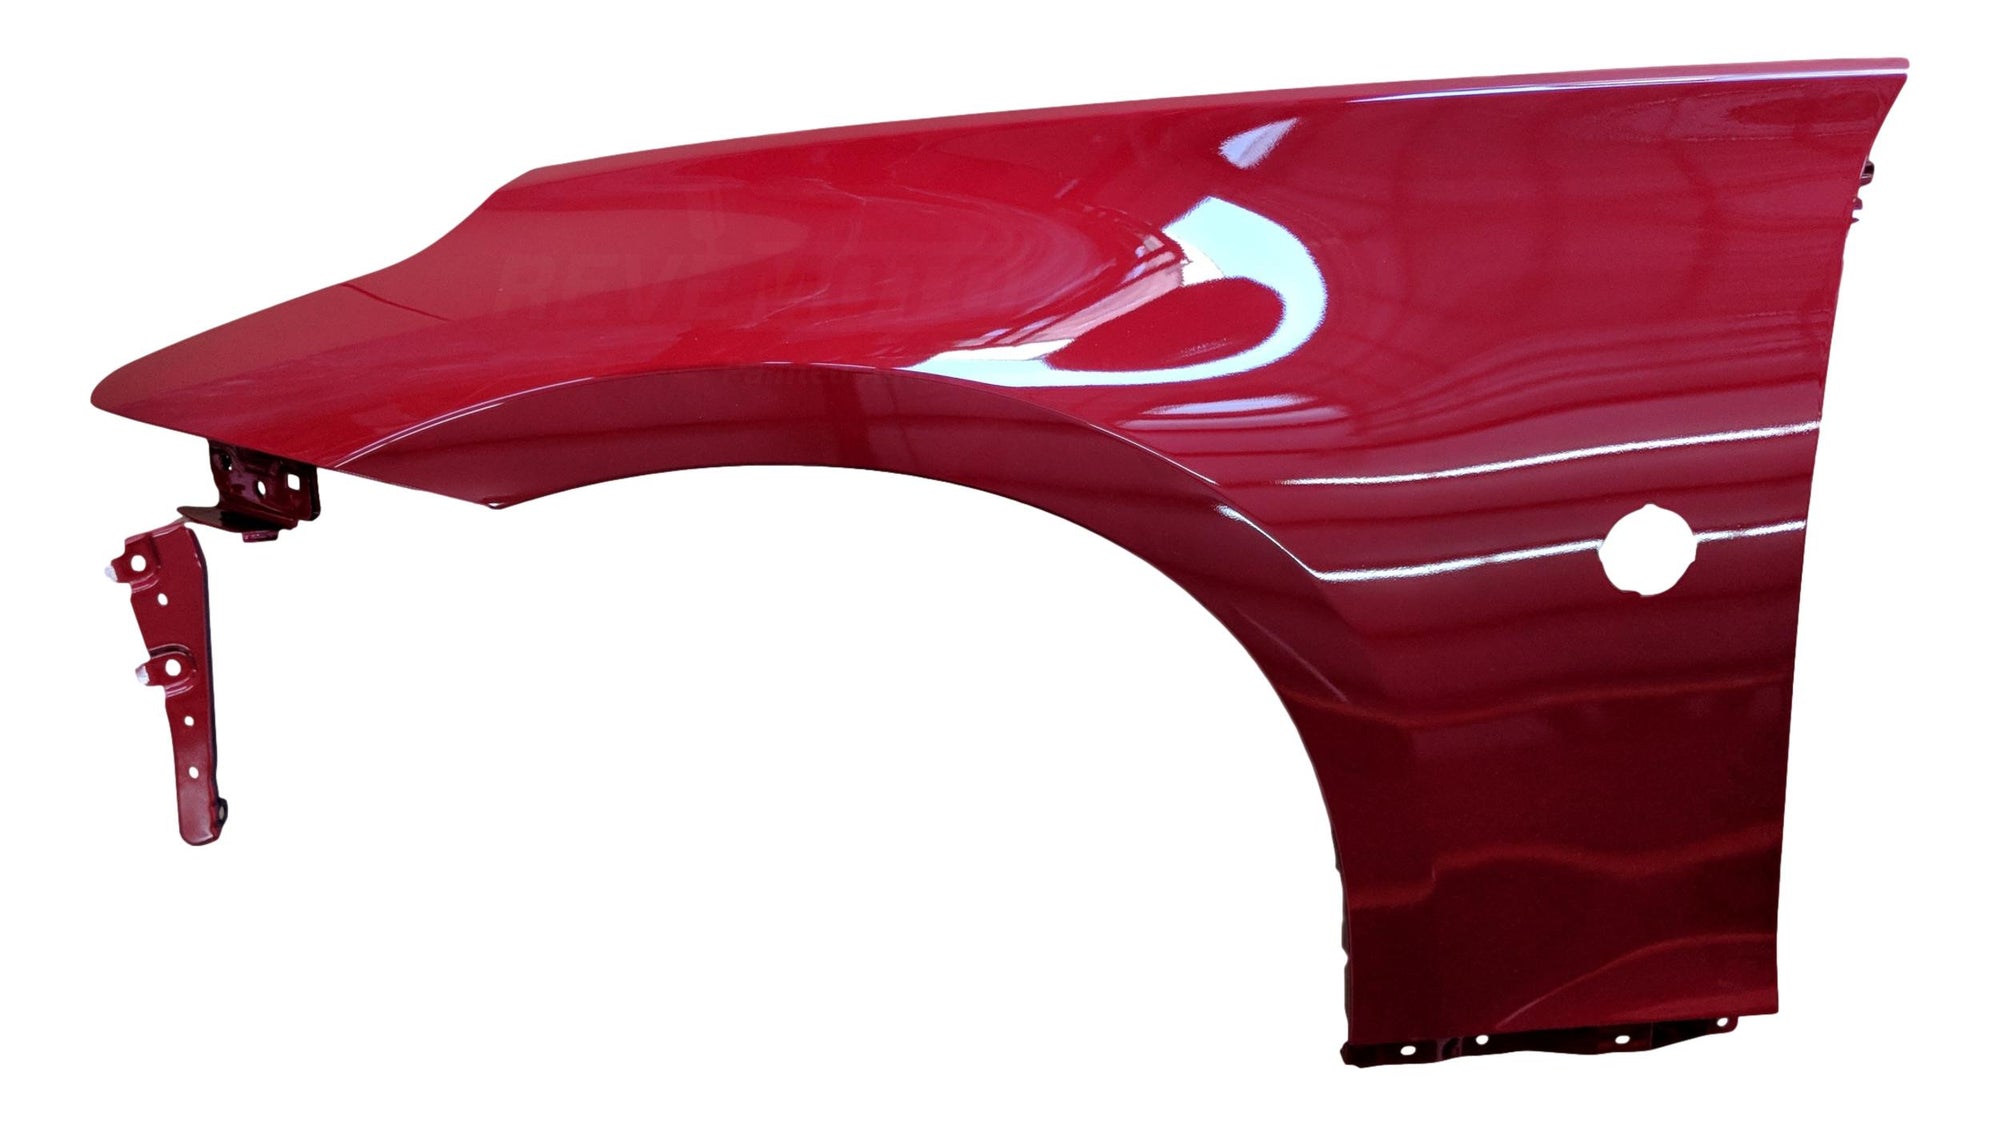 2009-2020 Nissan 370Z Fender Painted (Convertible) Left, Driver-Side Vibrant Red (A54) FCA011EAMA NI1240209